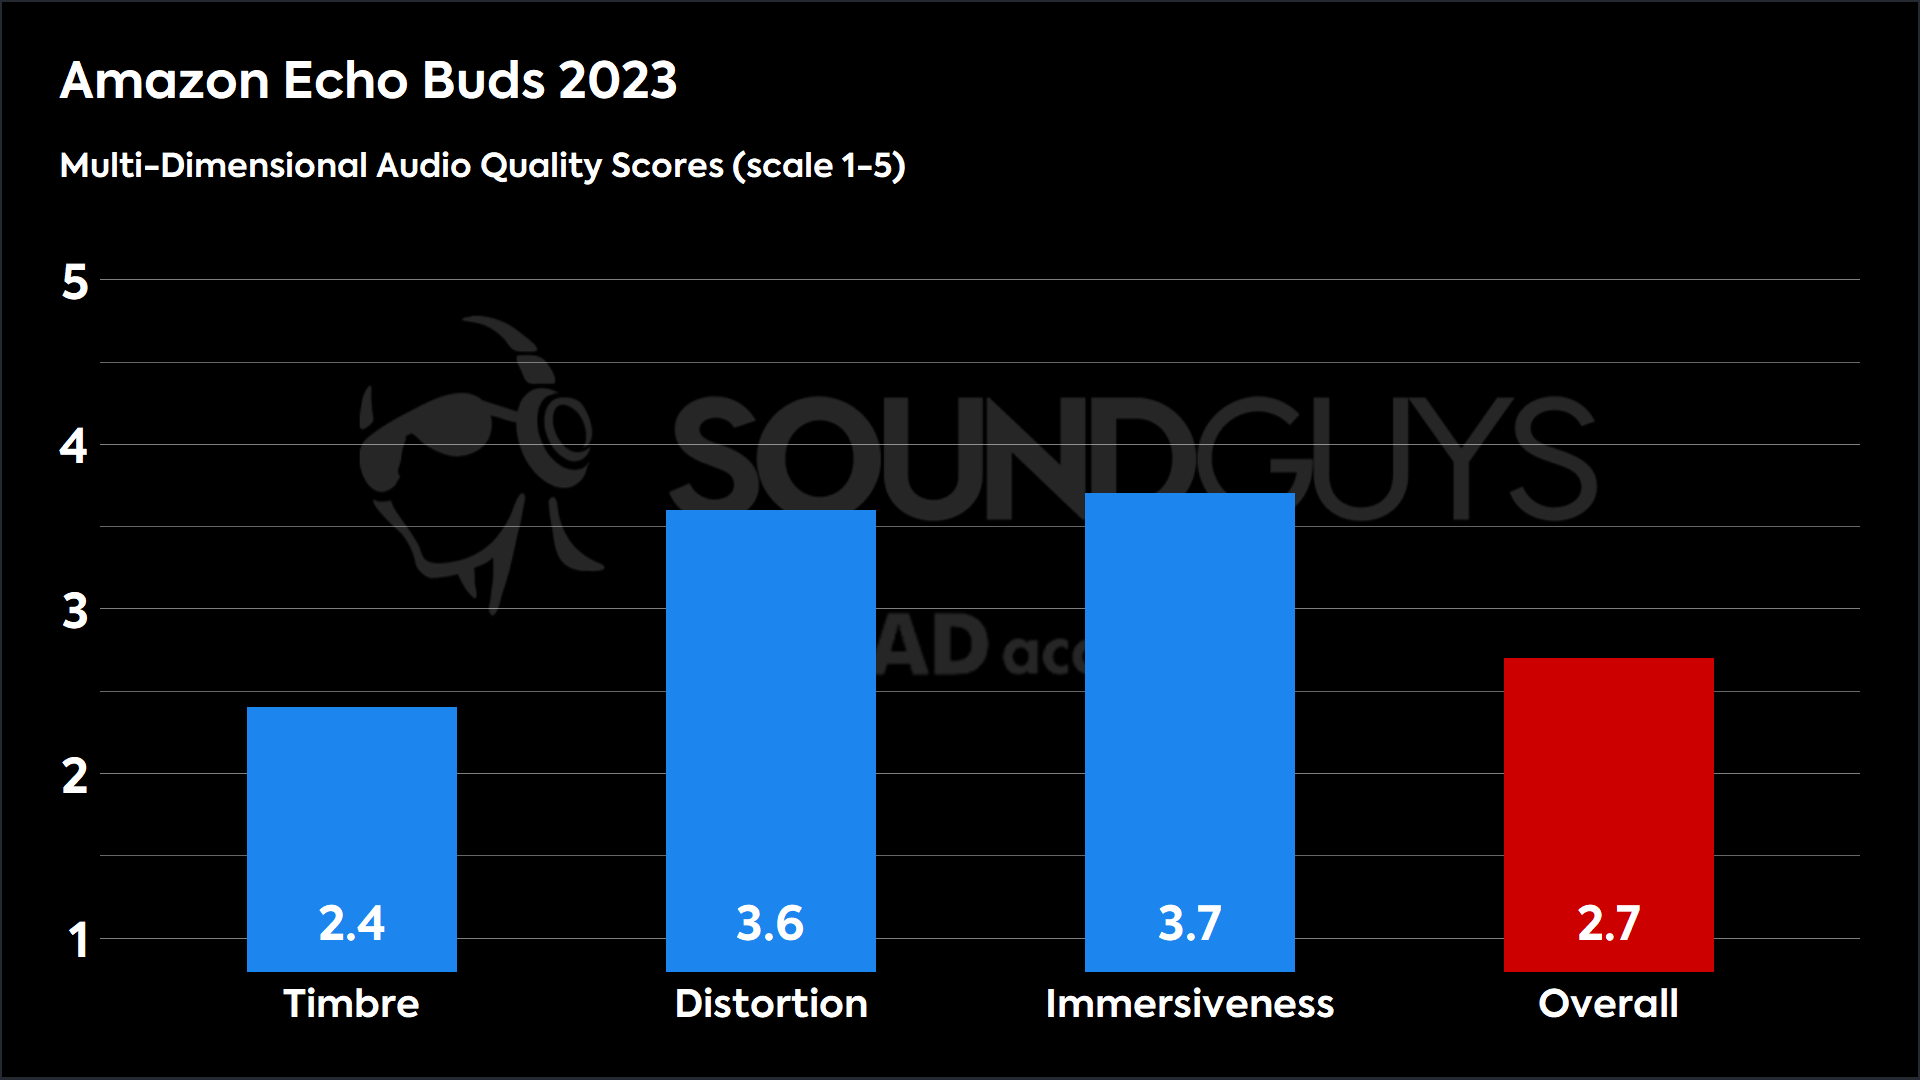 The Multi-Dimensional Audio Quality Scores are quite low, though distortion and immersiveness are respectable.